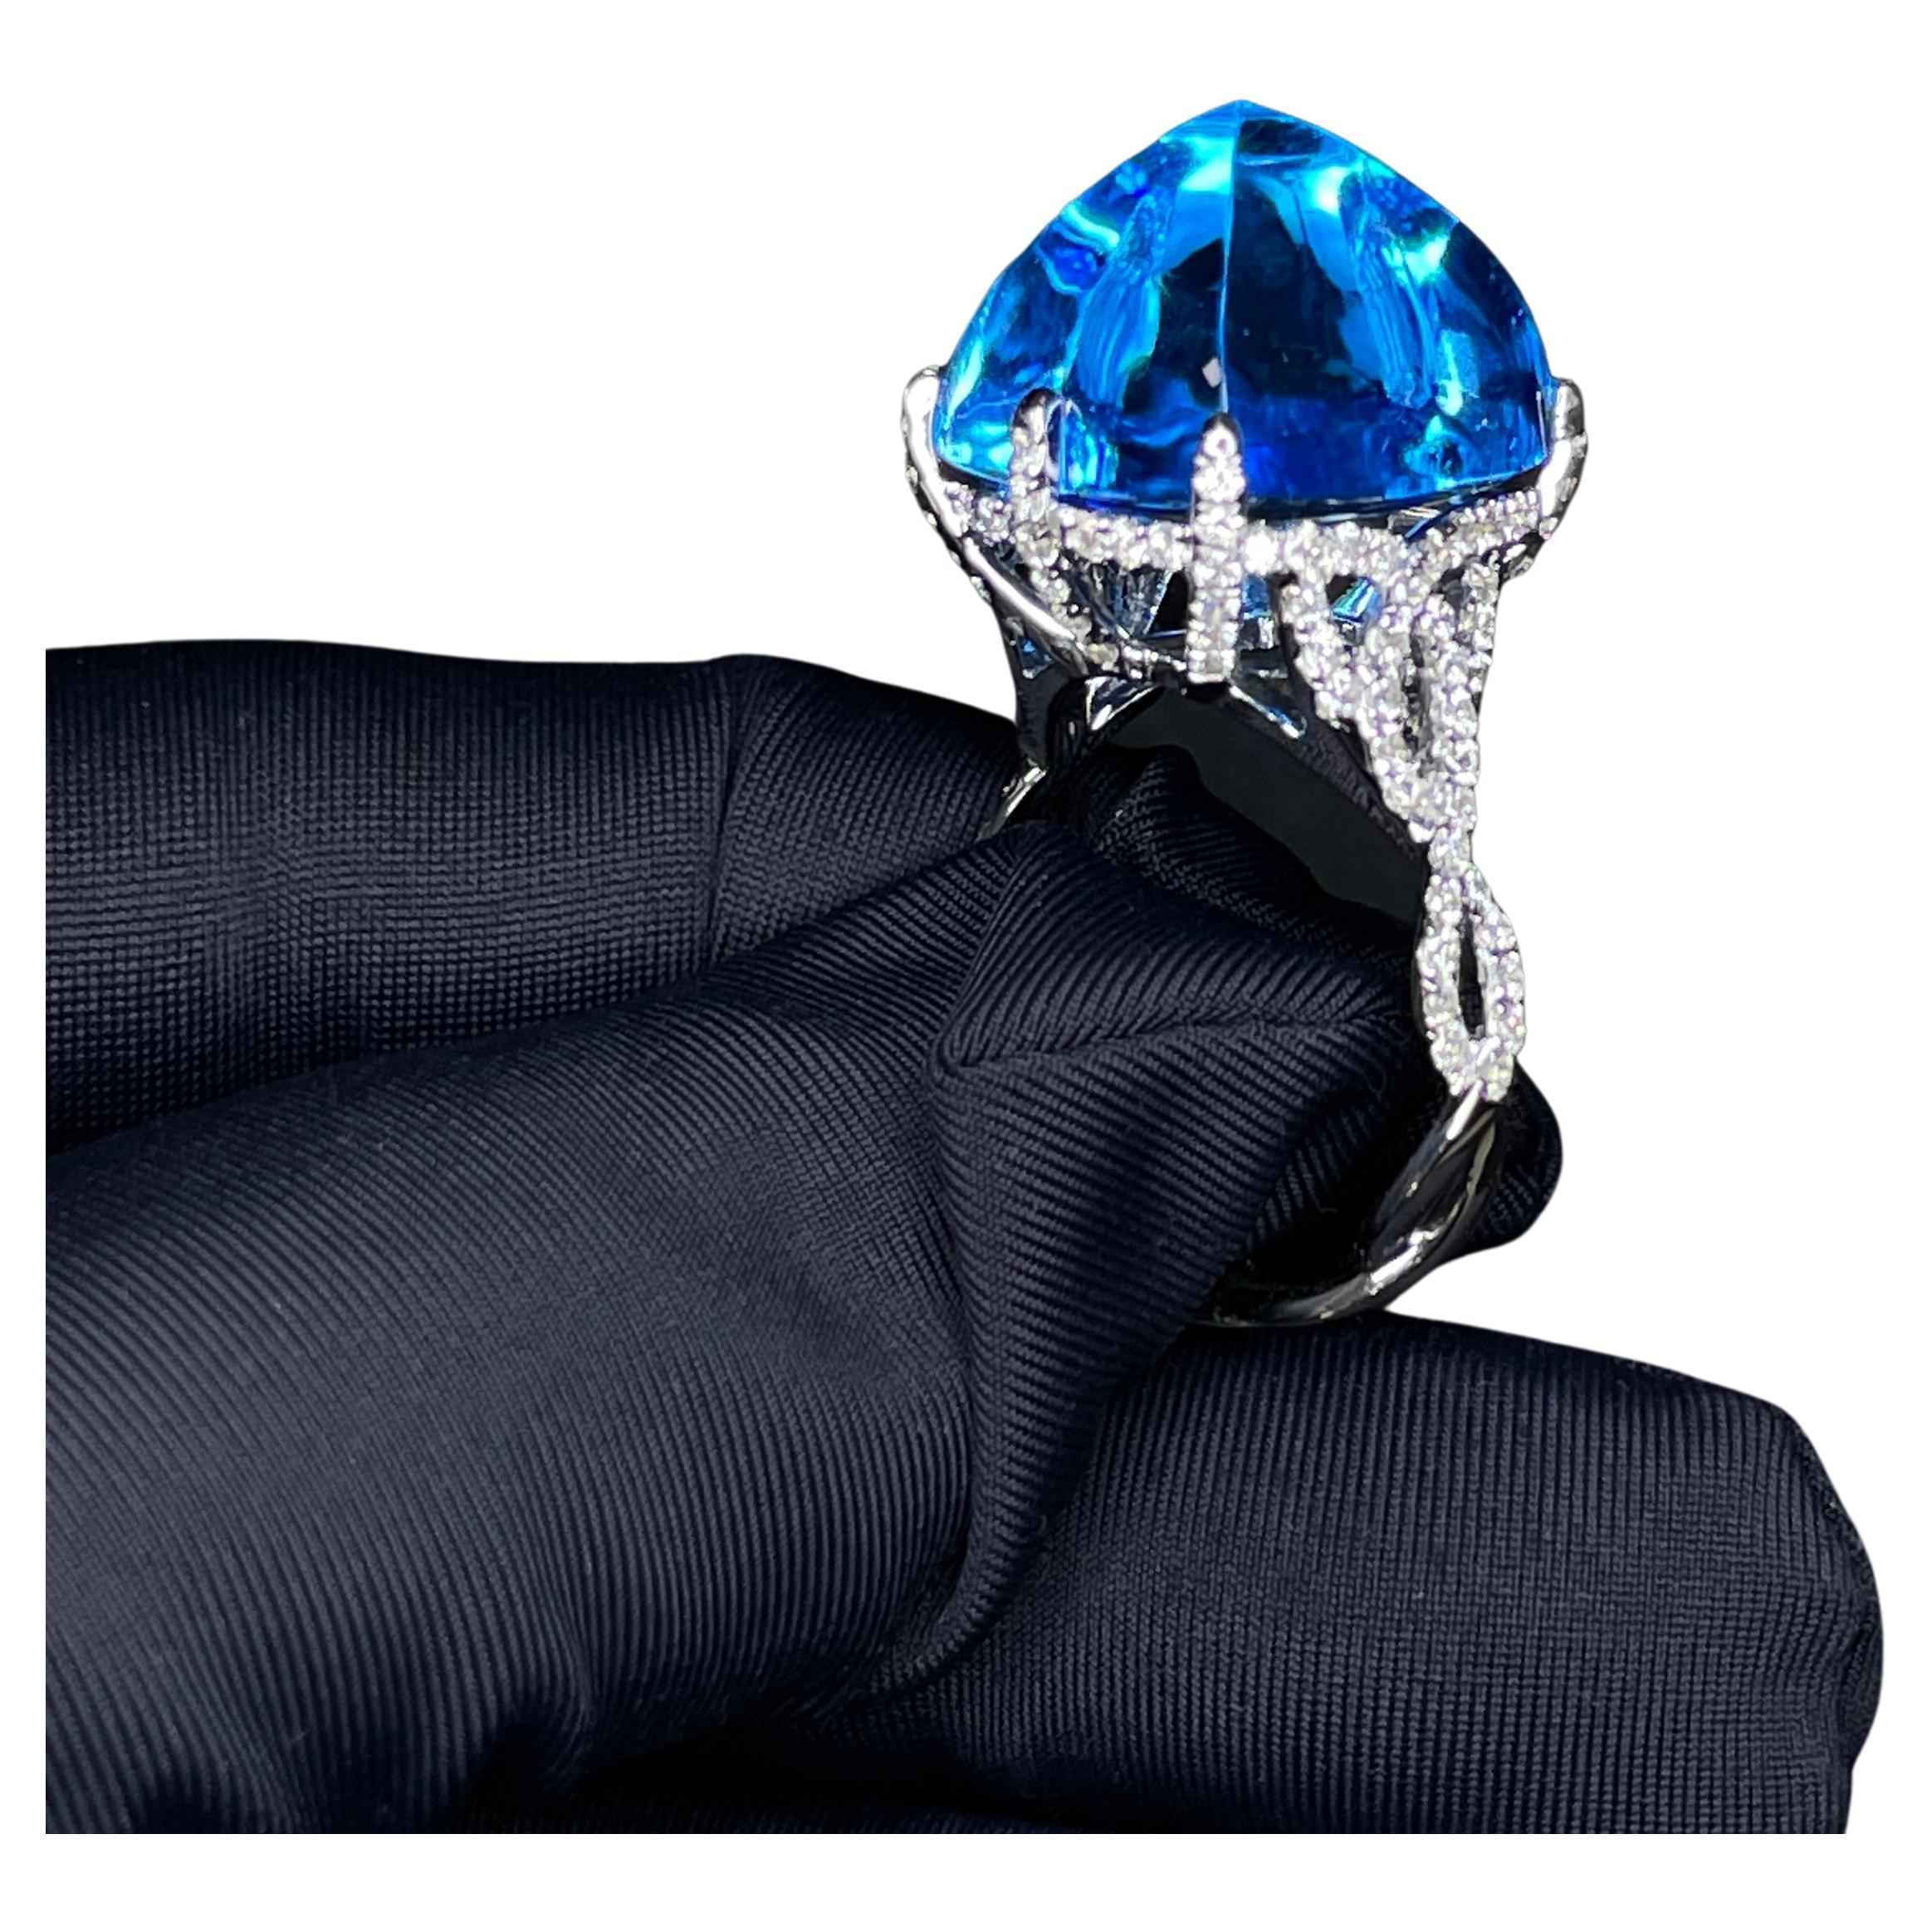 This is a Topaz Diamond ring in 18K White Gold. The whooping 24 CT Topaz is destined to be a show stopper. The sugar-loaf Topaz is being held by 6 Diamonds encrusted claws in a spiraling descending design, which makes it one of its kind. This is a